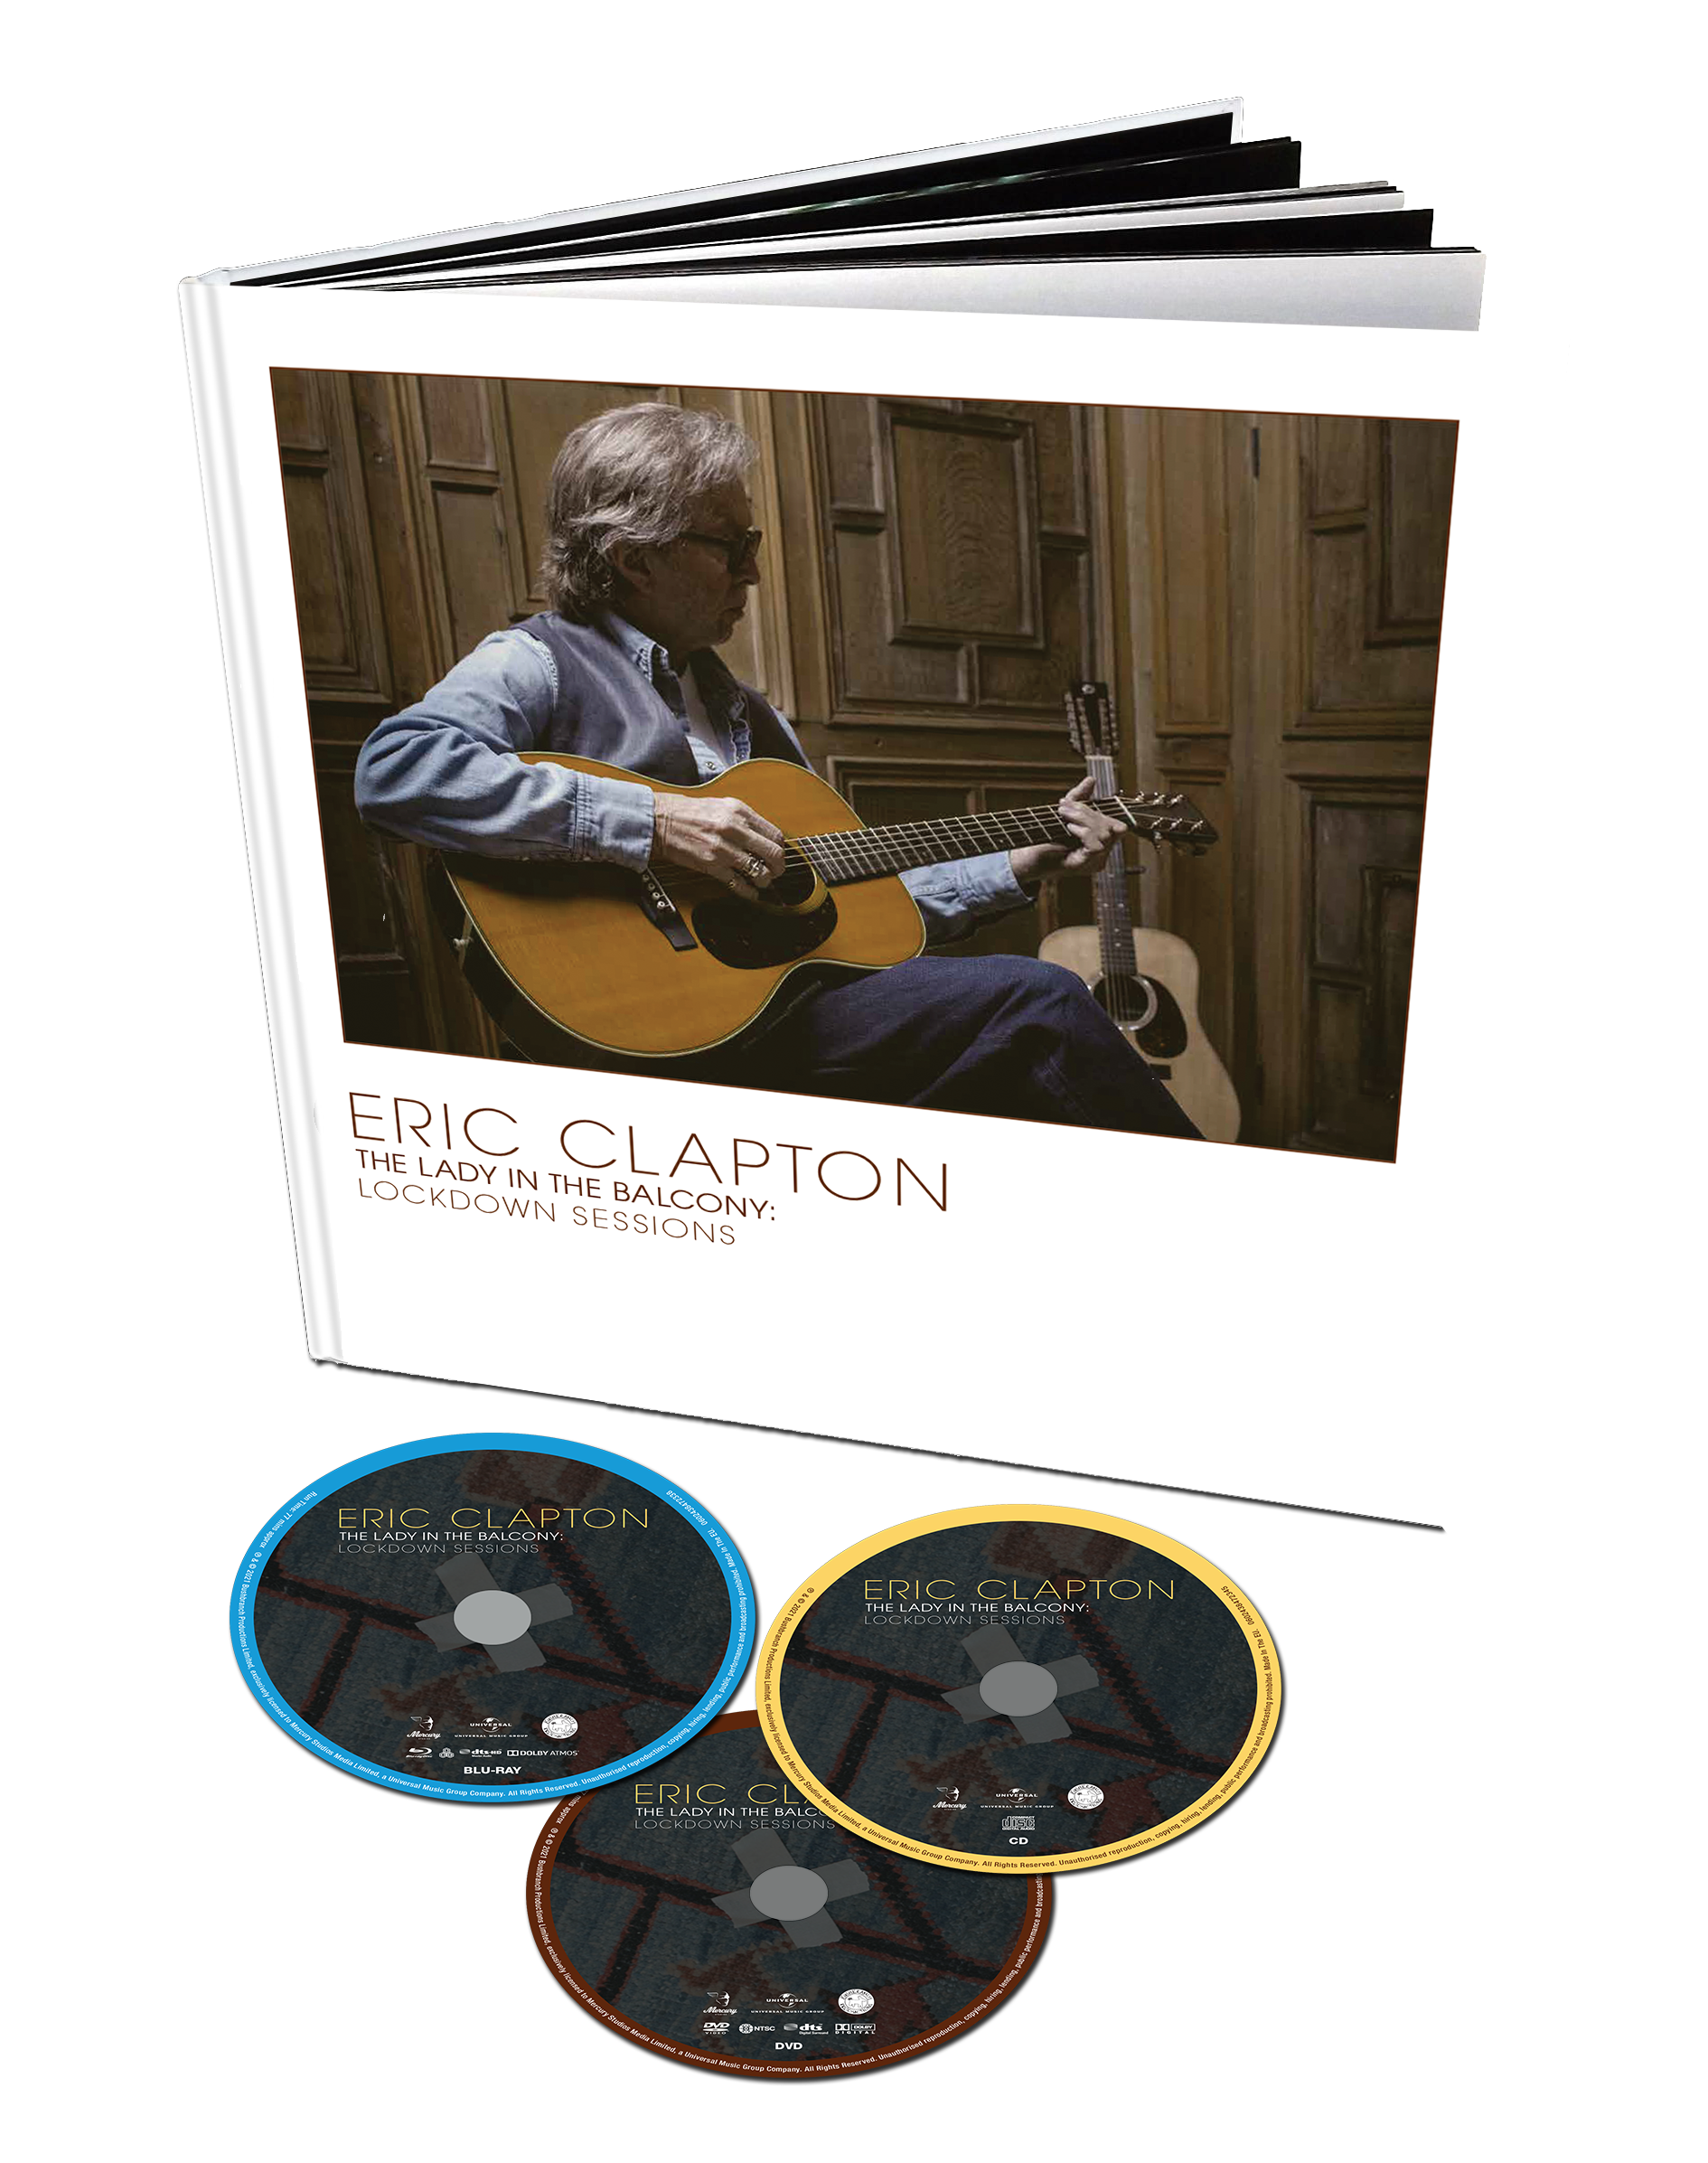 Eric Clapton - The Lady In The Balcony - Lockdown Sessions: Deluxe Book DVD + Blu-Ray + CD Edition